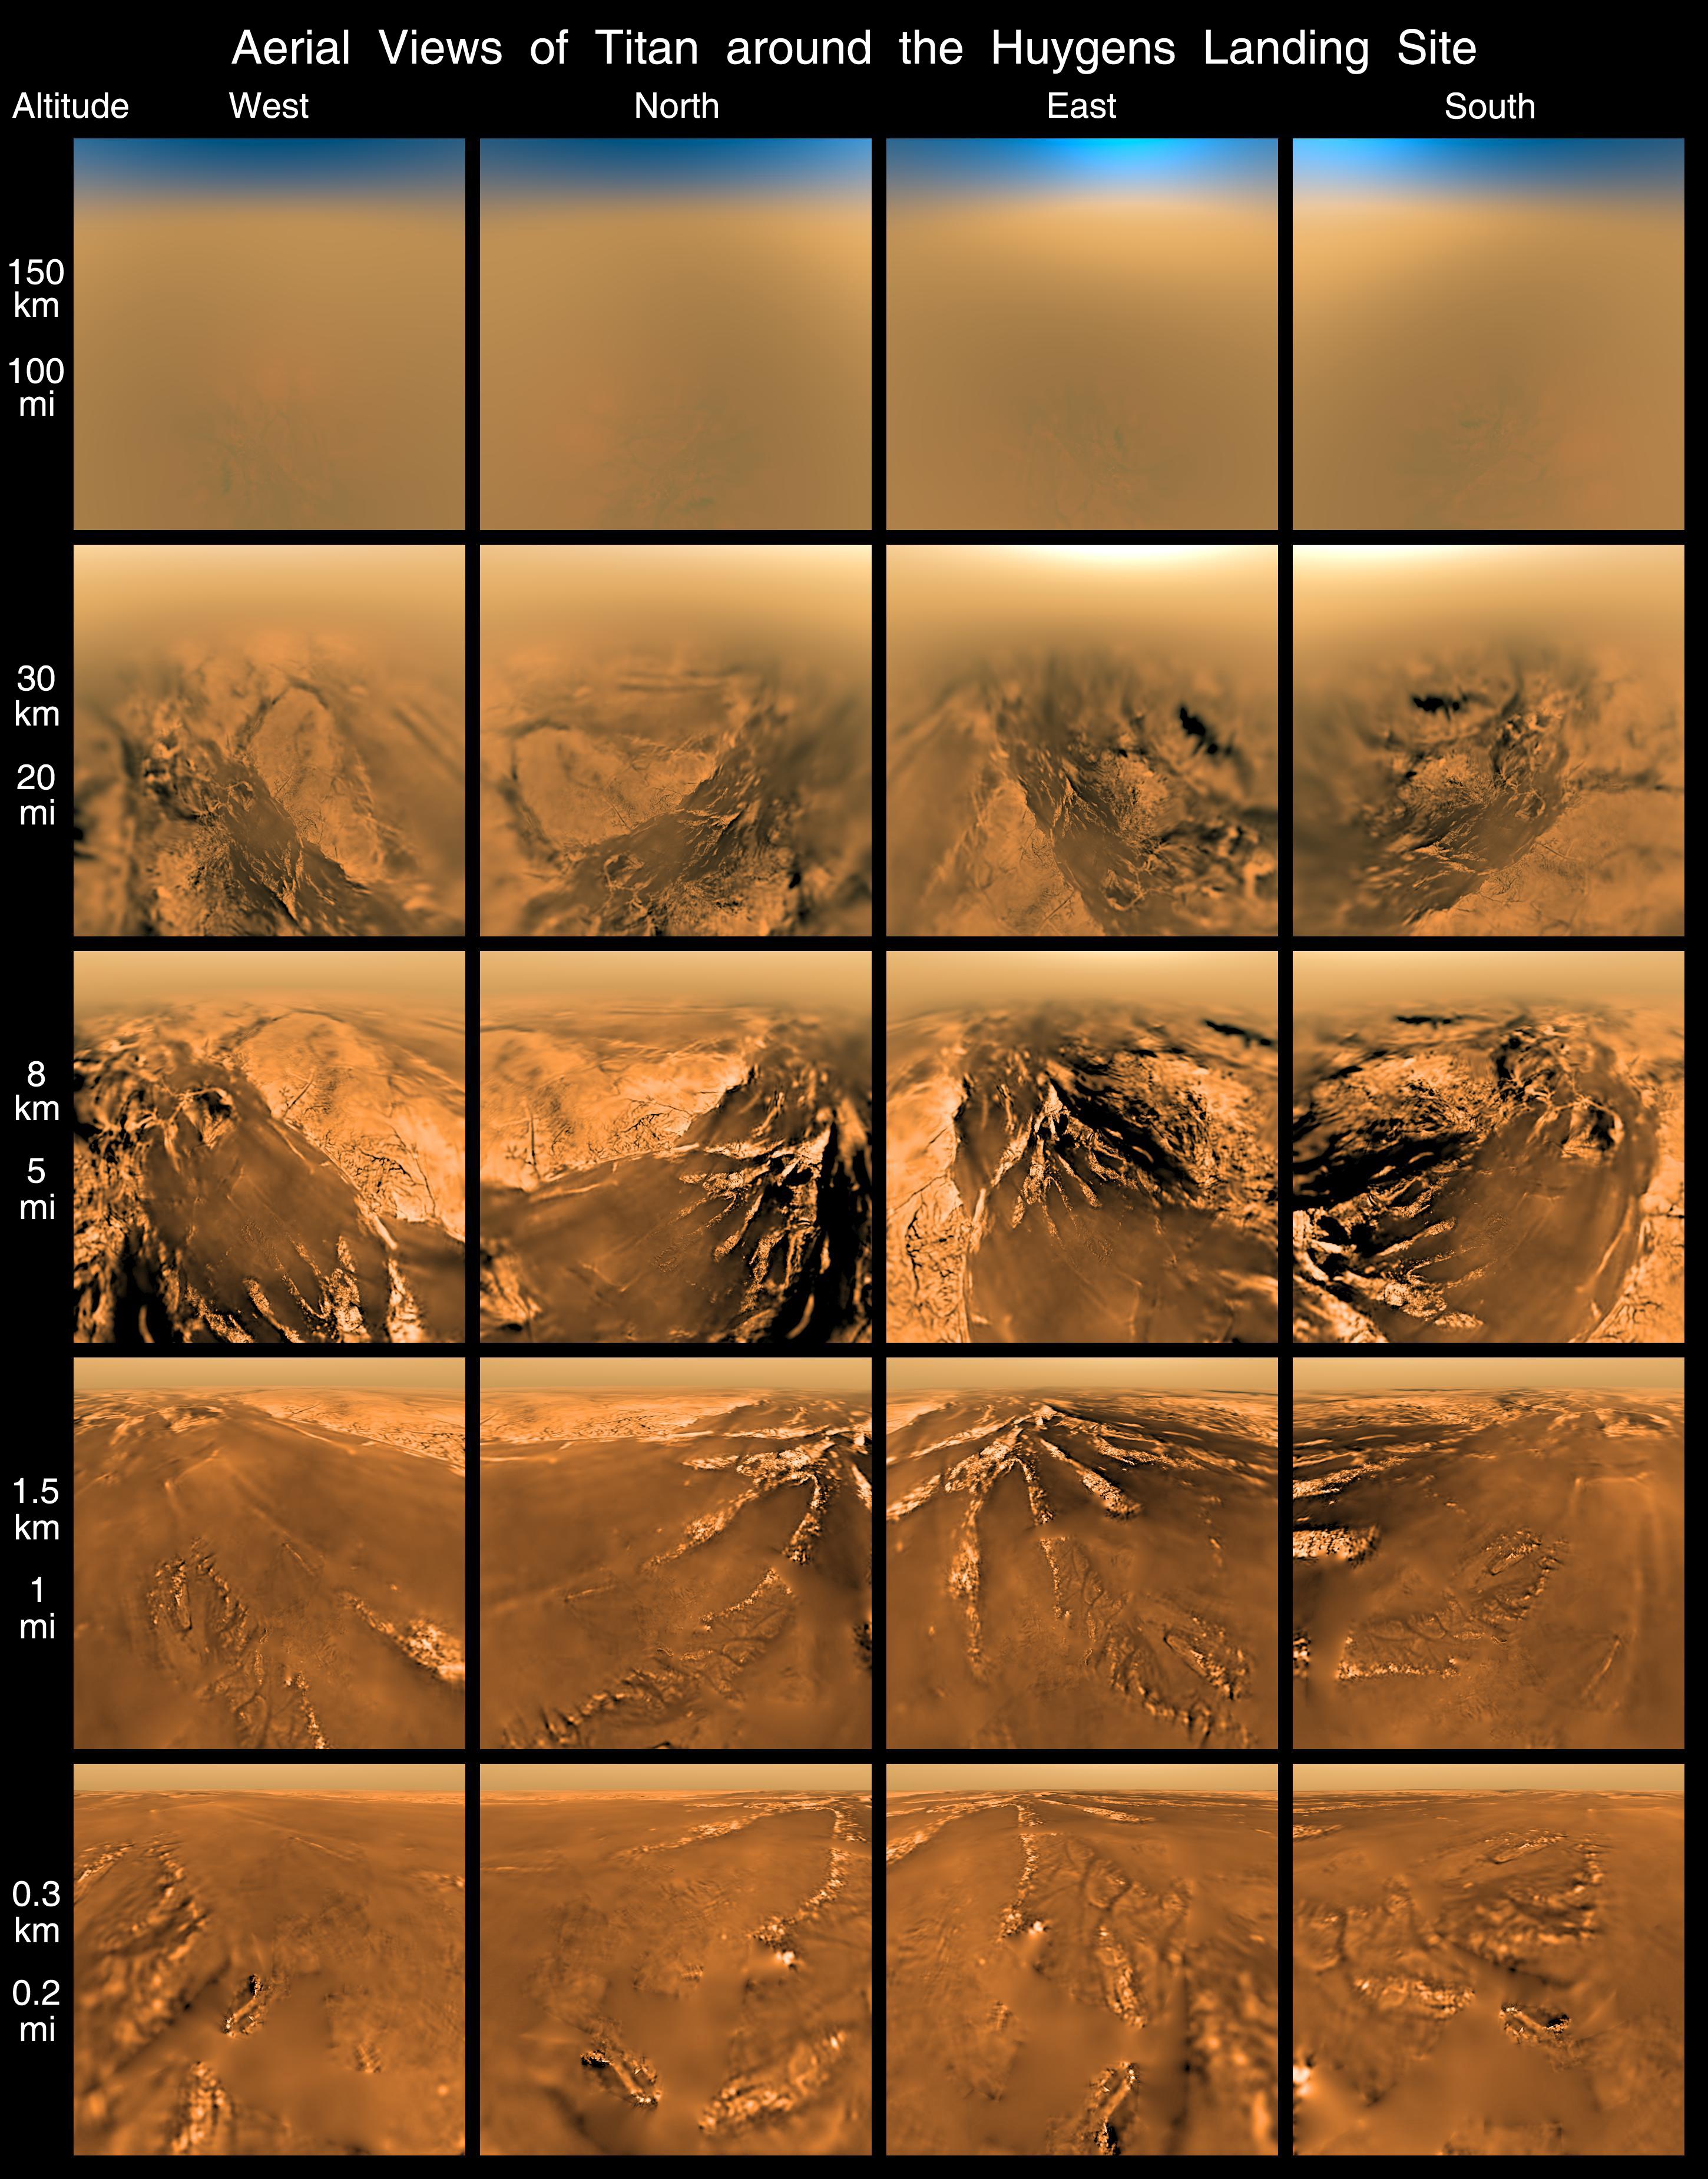 This poster shows a set of images acquired by Huygens